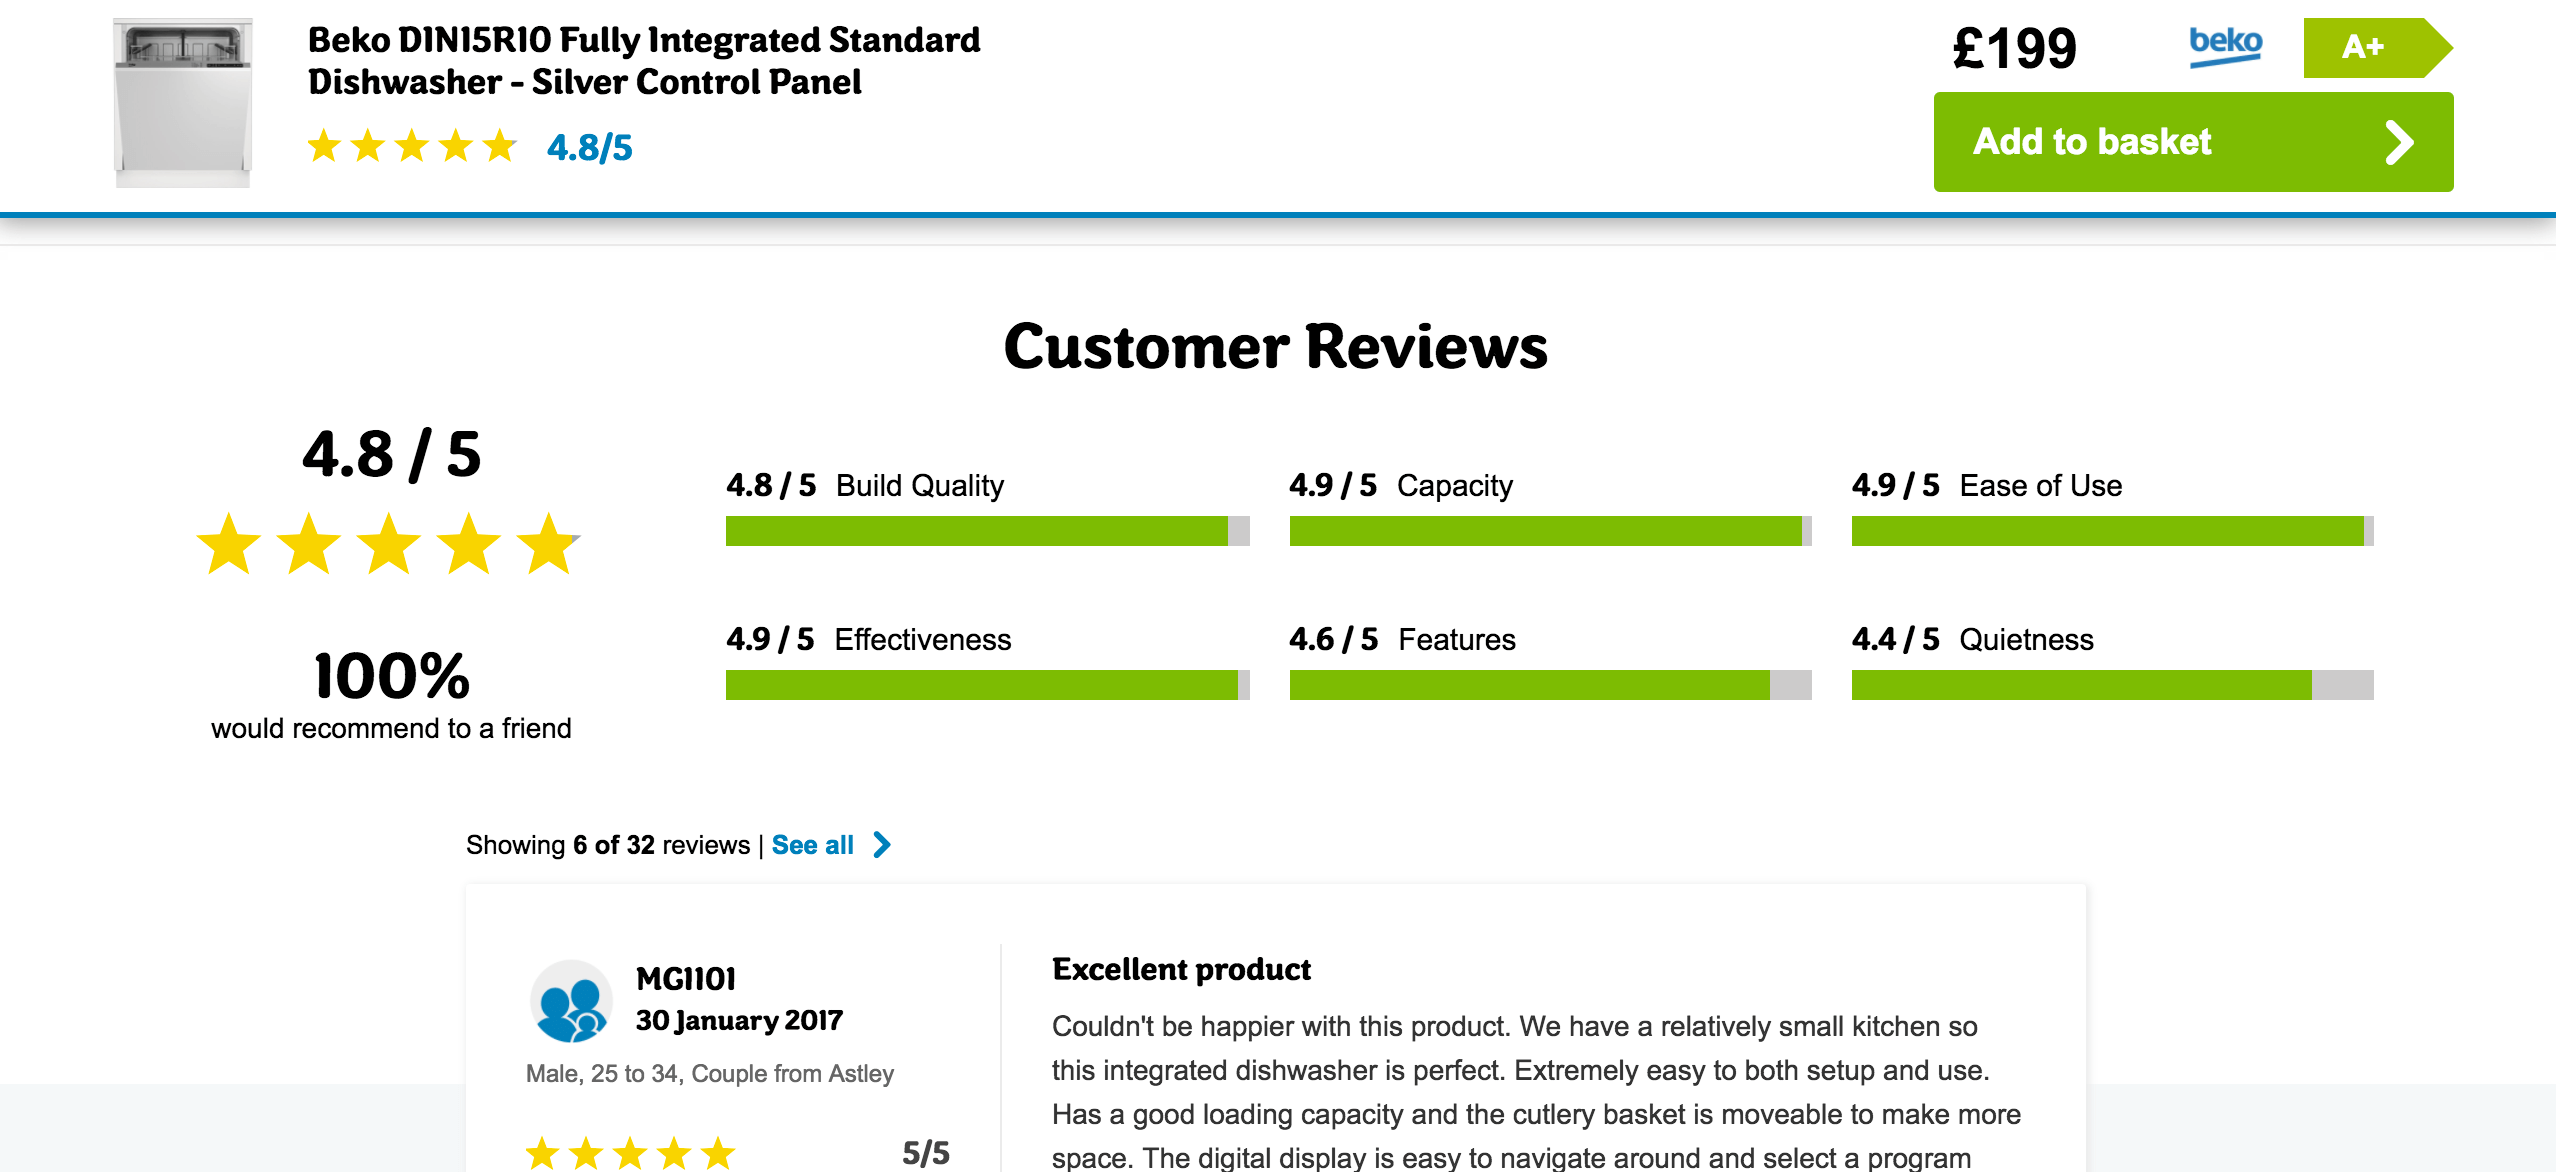 Paul Rogers - The Definitive Guide to eCommerce Product Reviews